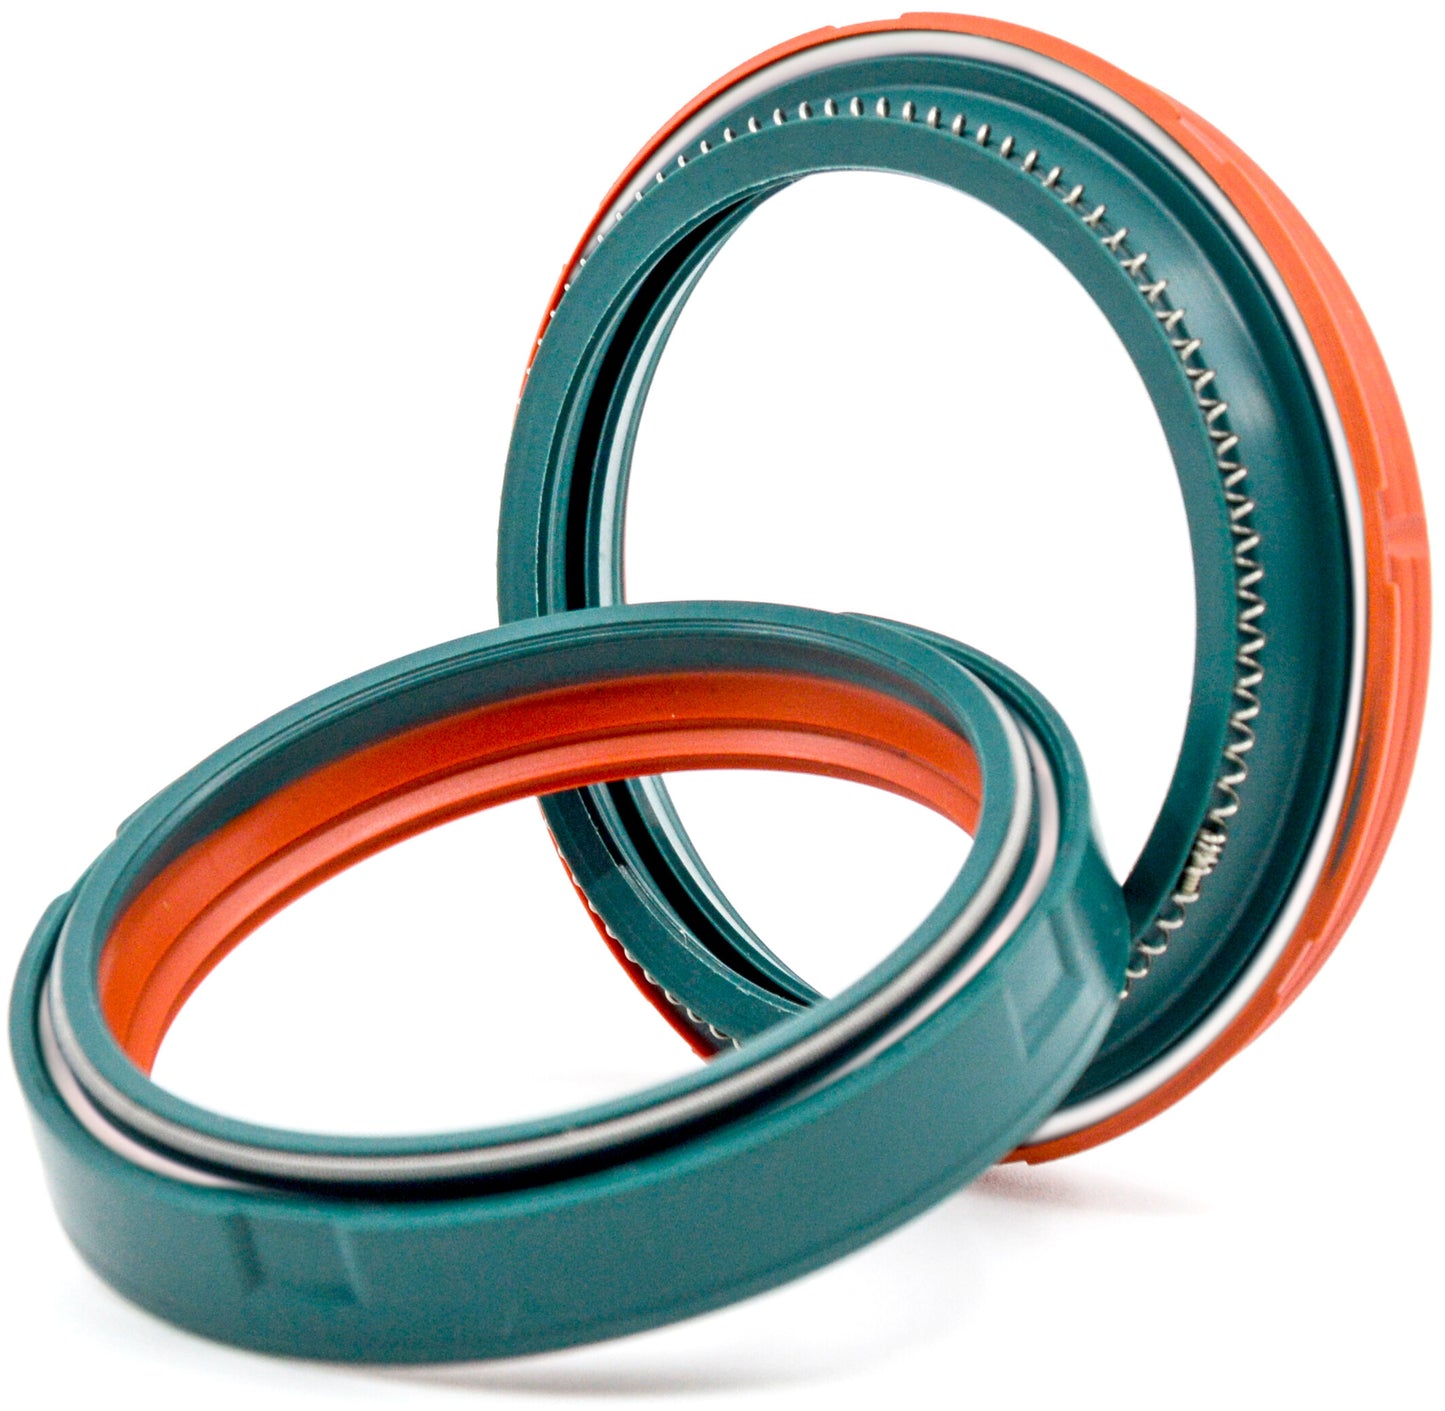 DUAL COMPOUND FORK SEAL KIT WP 48 MM